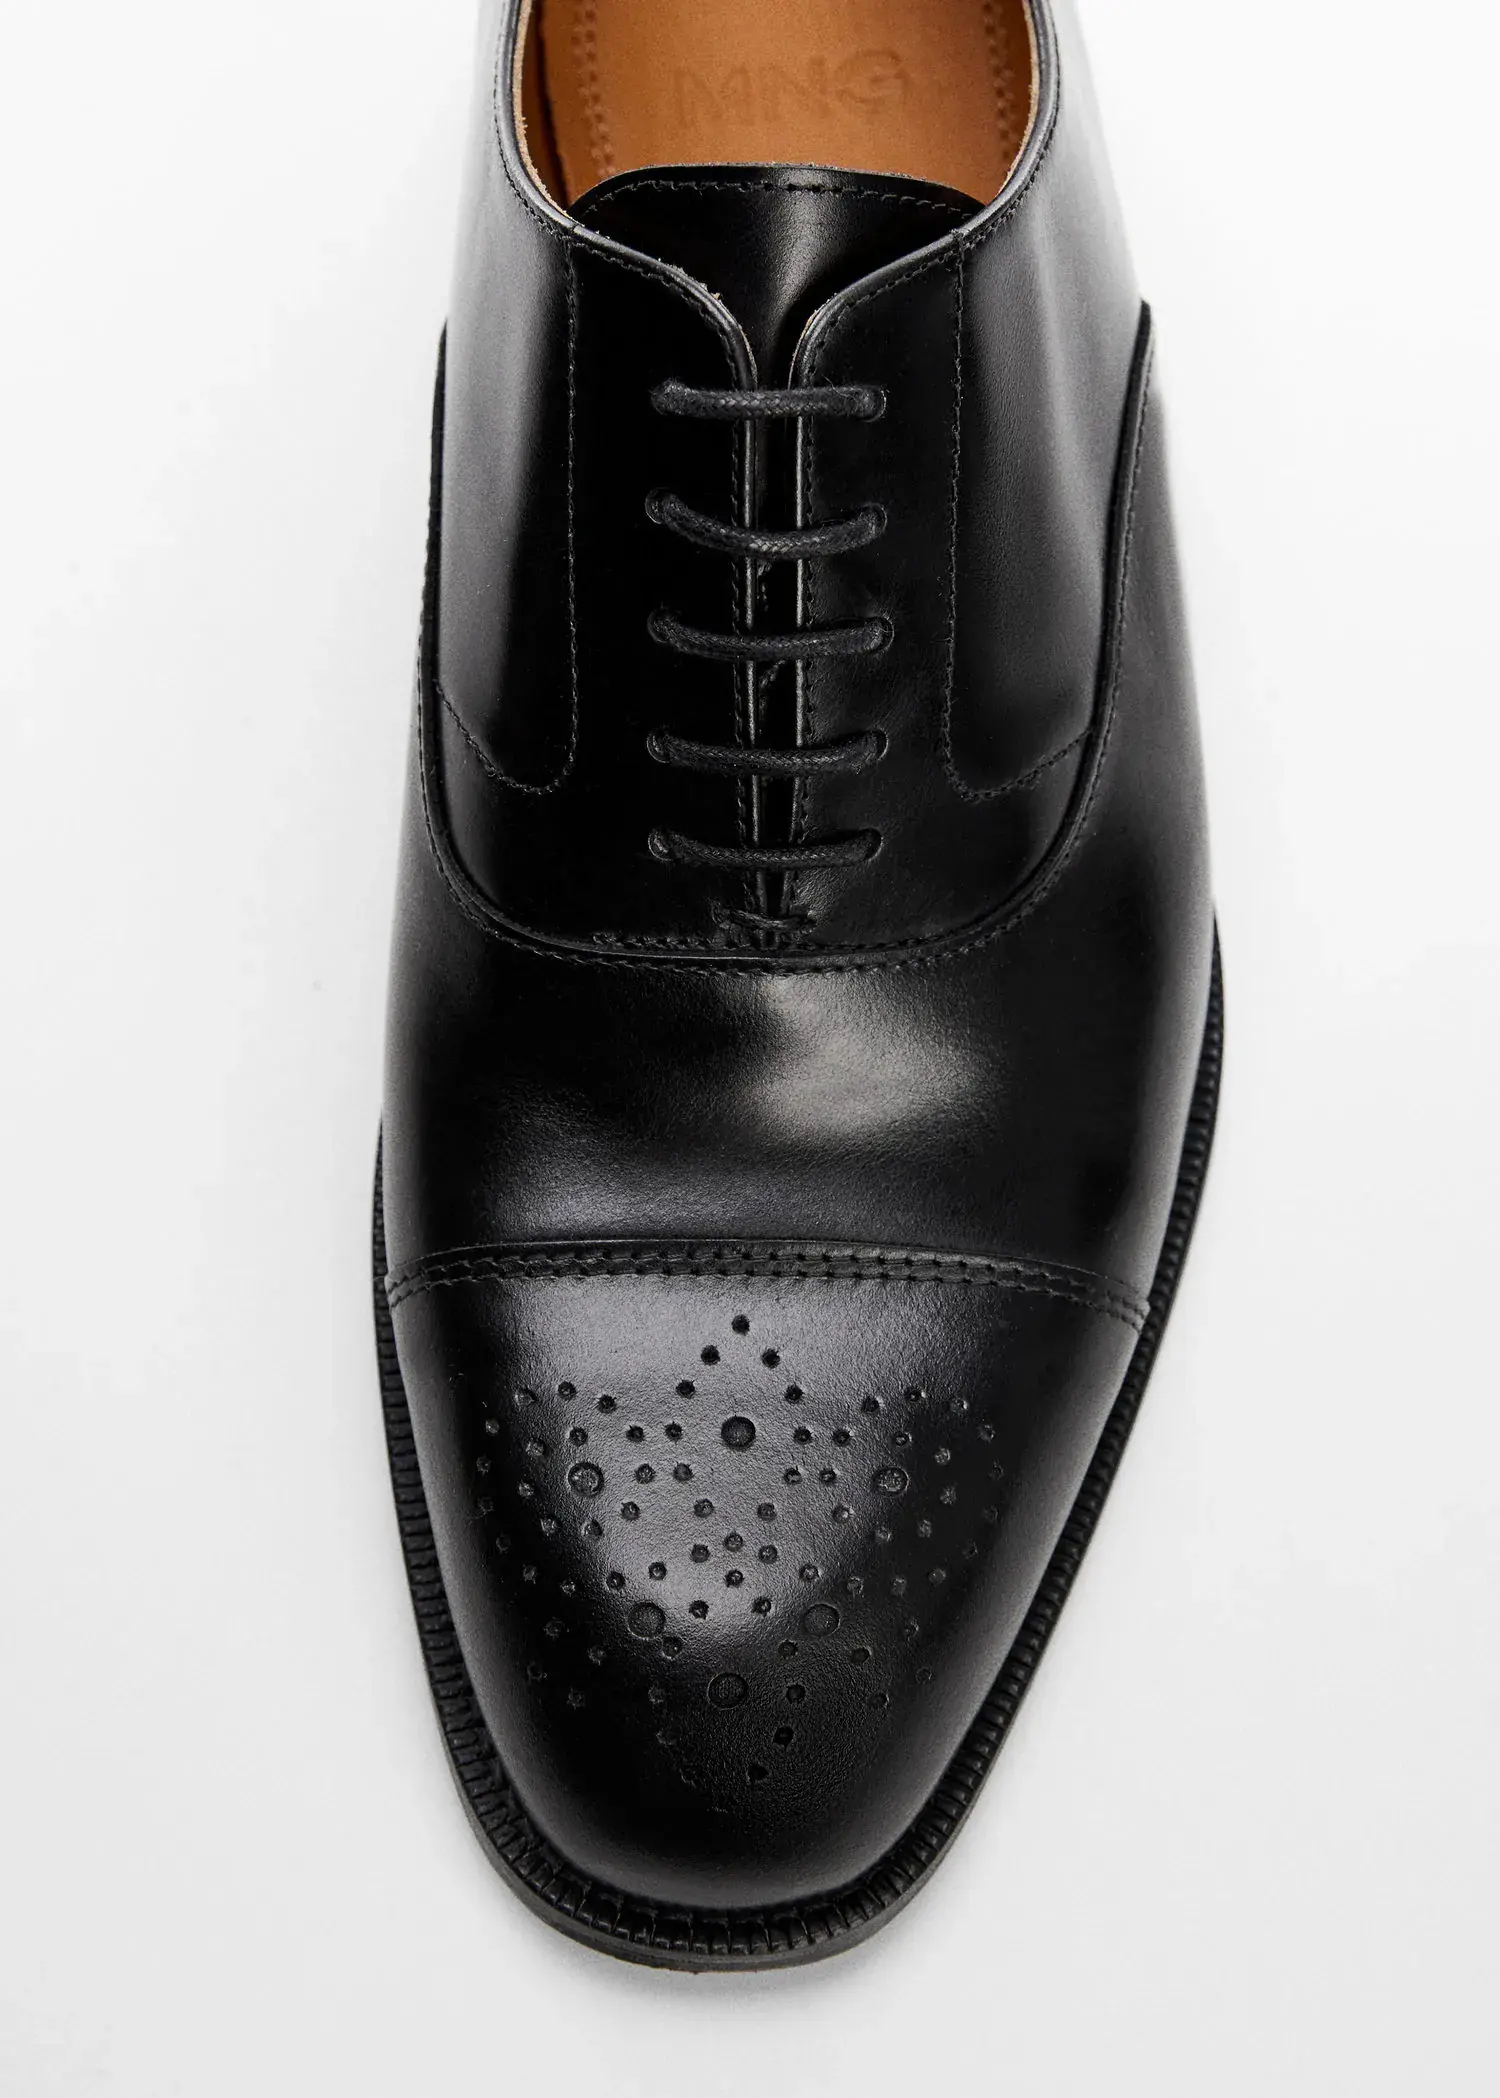 Mango Laser-cut leather blucher shoes. a pair of black shoes on a white surface. 